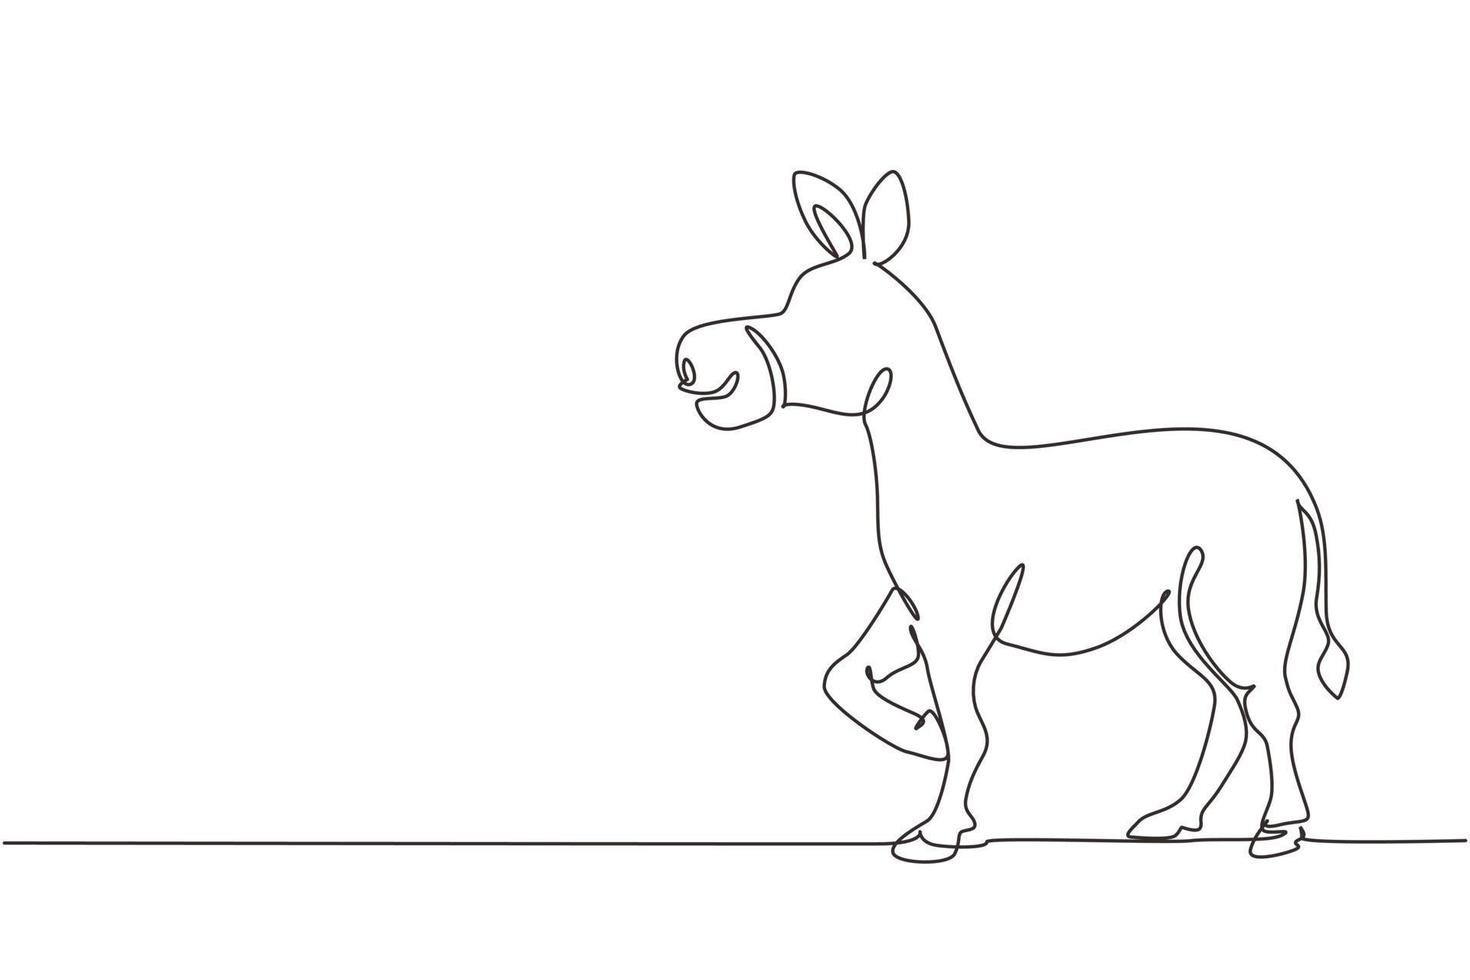 Single one line drawing donkey cute farm animal lift one front leg.  Friendly tame animals. Helping farmers bring agricultural produce. Modern  continuous line draw design graphic vector illustration 8990140 Vector Art  at